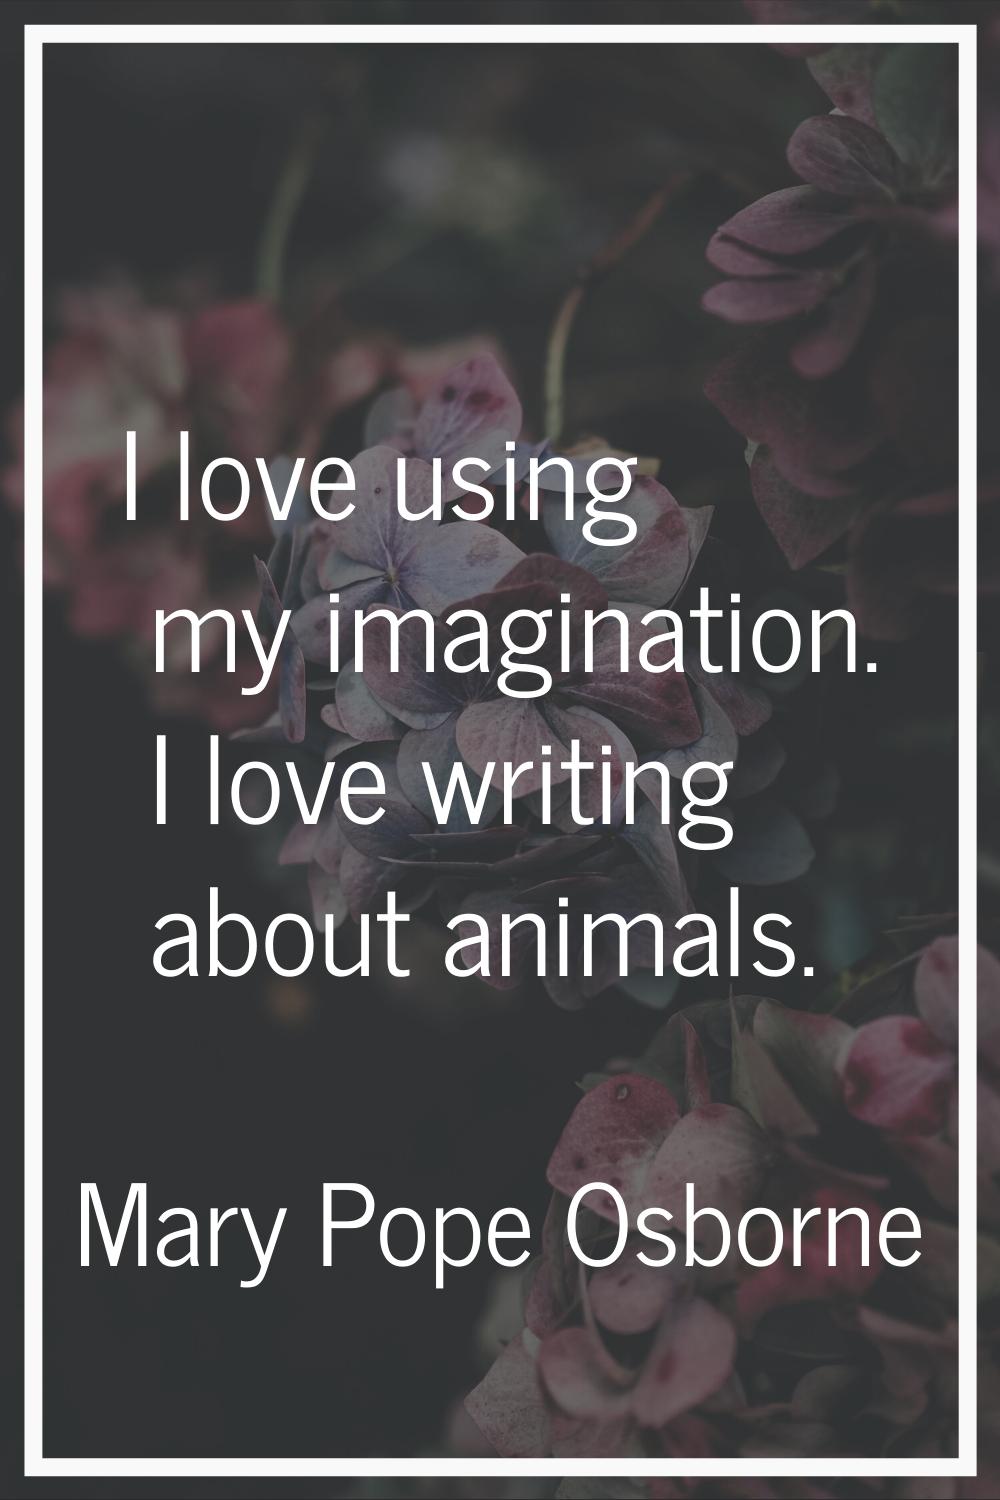 I love using my imagination. I love writing about animals.